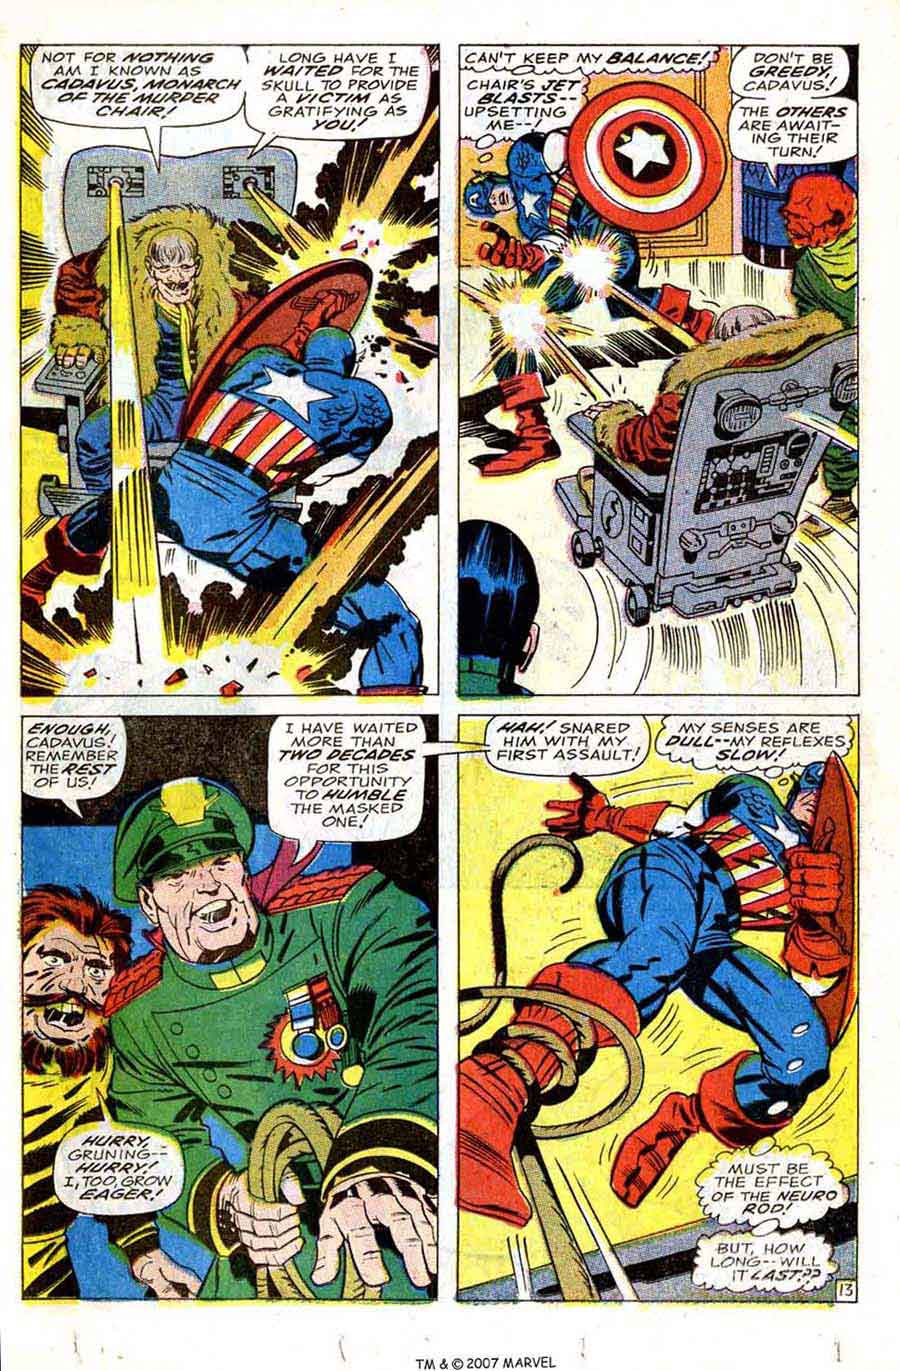 Captain America v1 #104 marvel comic book page art by Jack Kirby